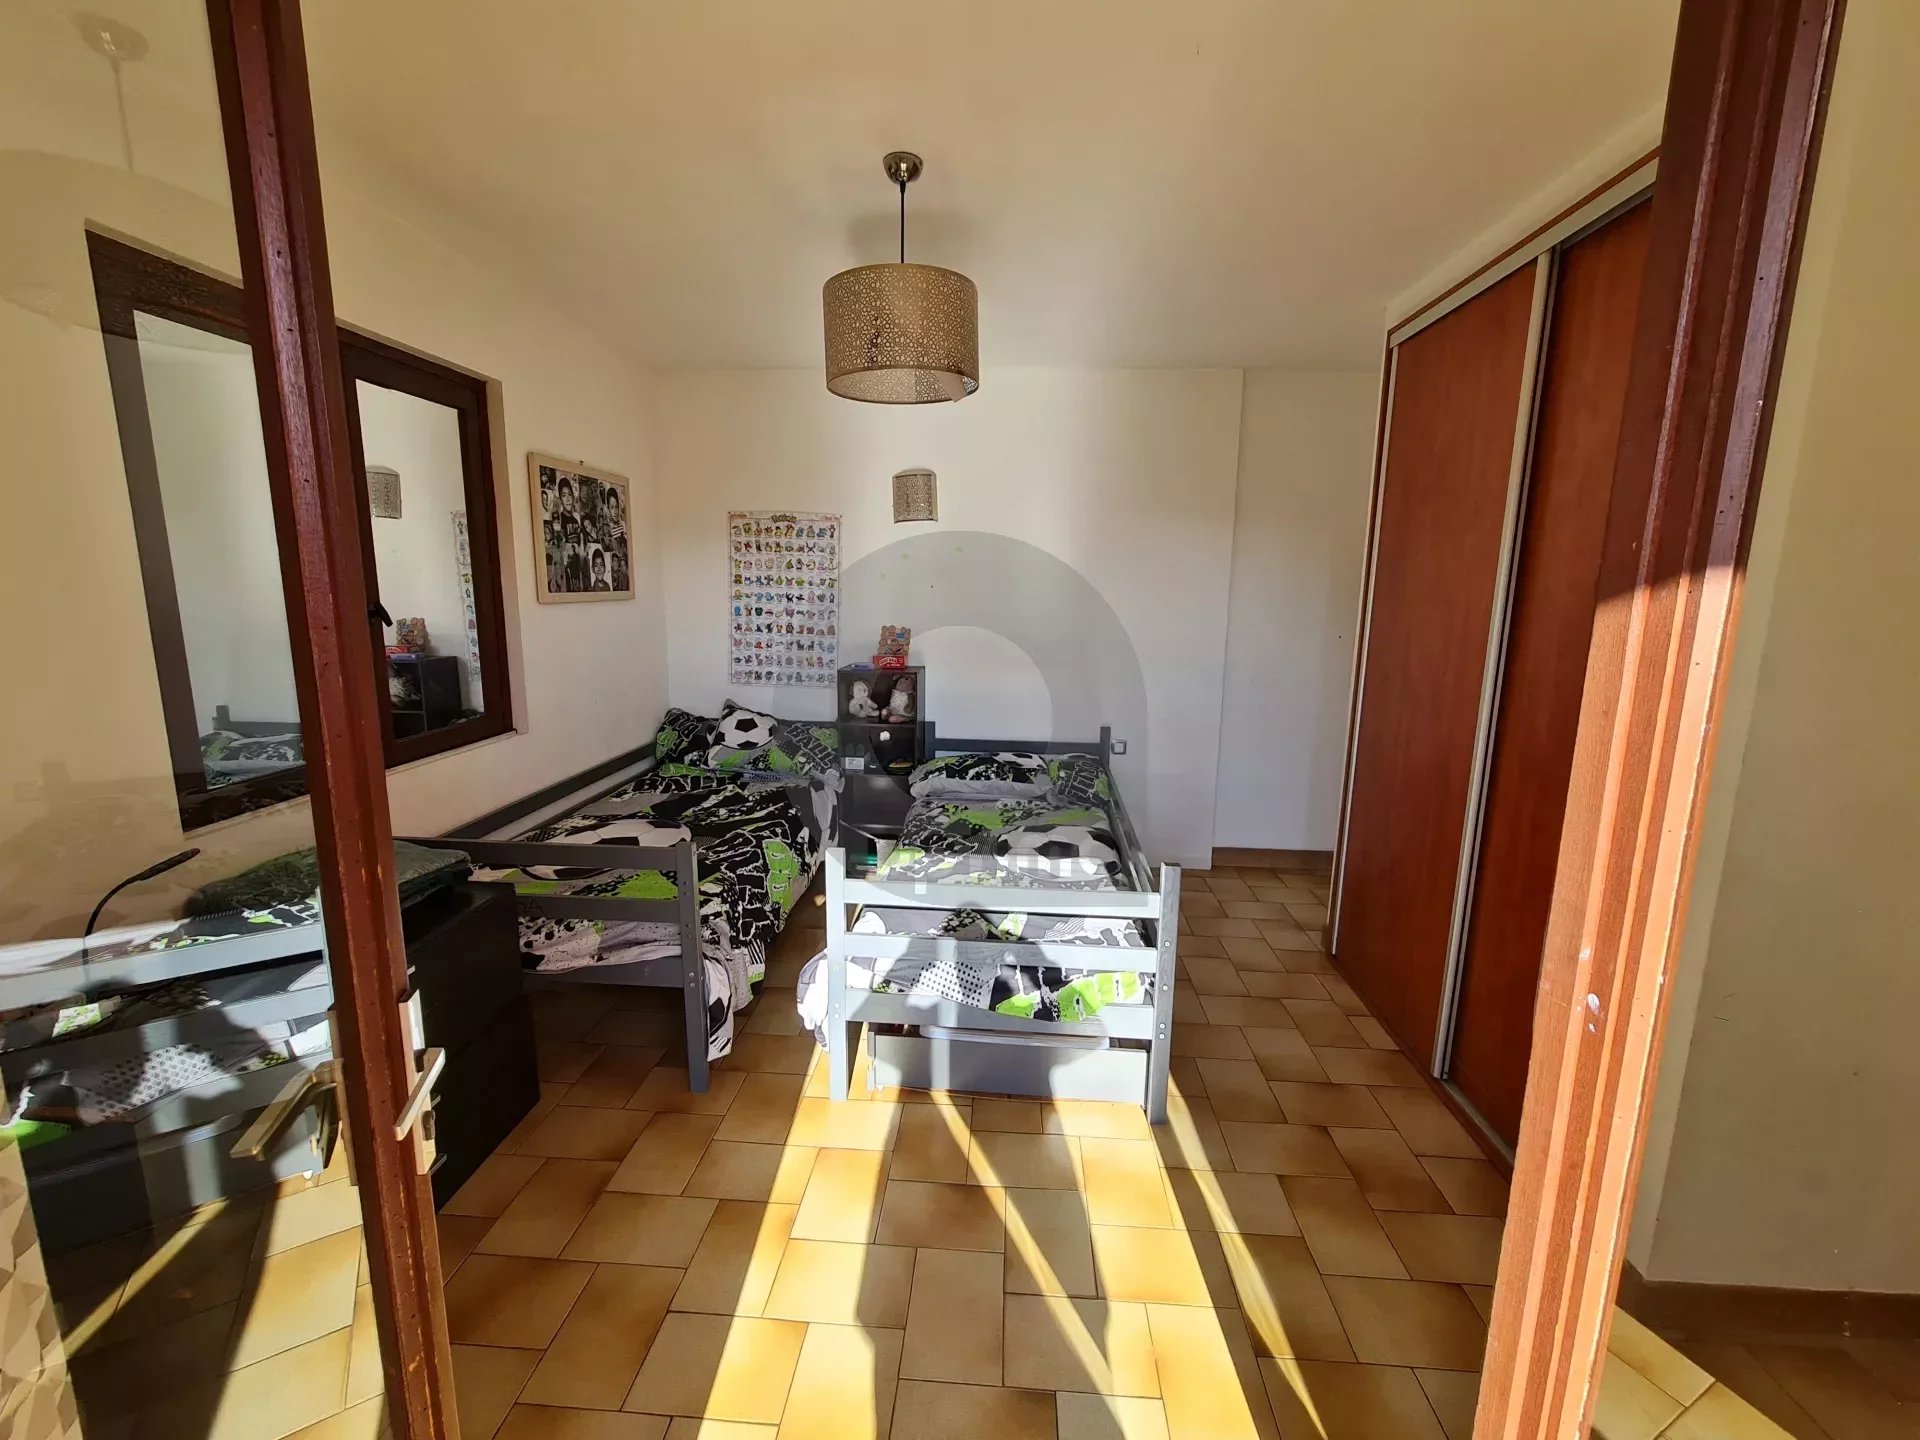 HOUSE SEVERAL FLATS RENTED MENTON MONTI